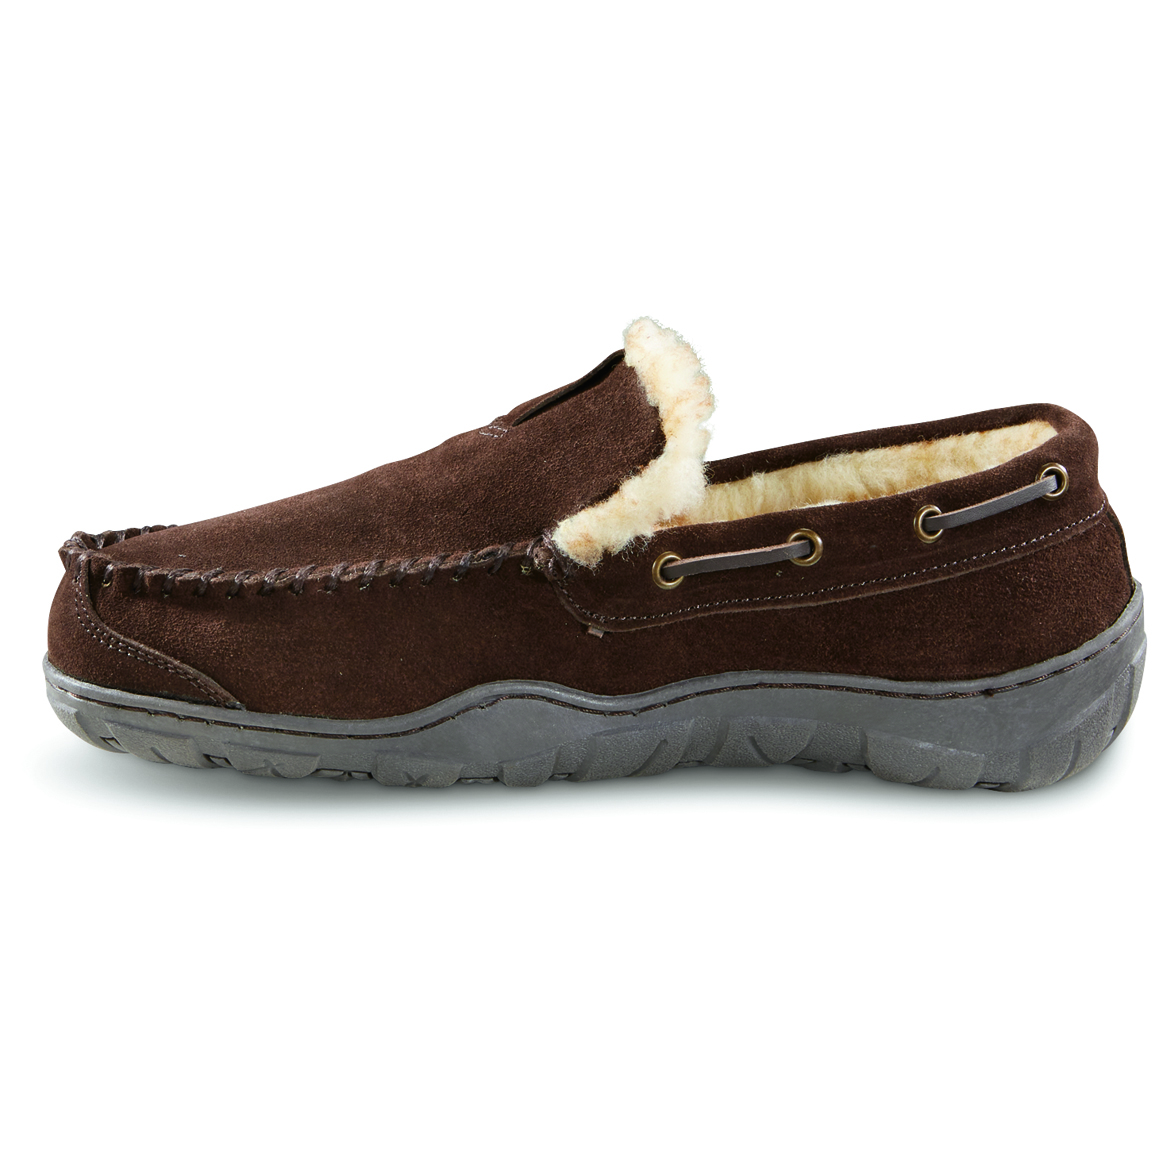 Guide Gear Men's Suede Moccasin Slippers, Chocolate